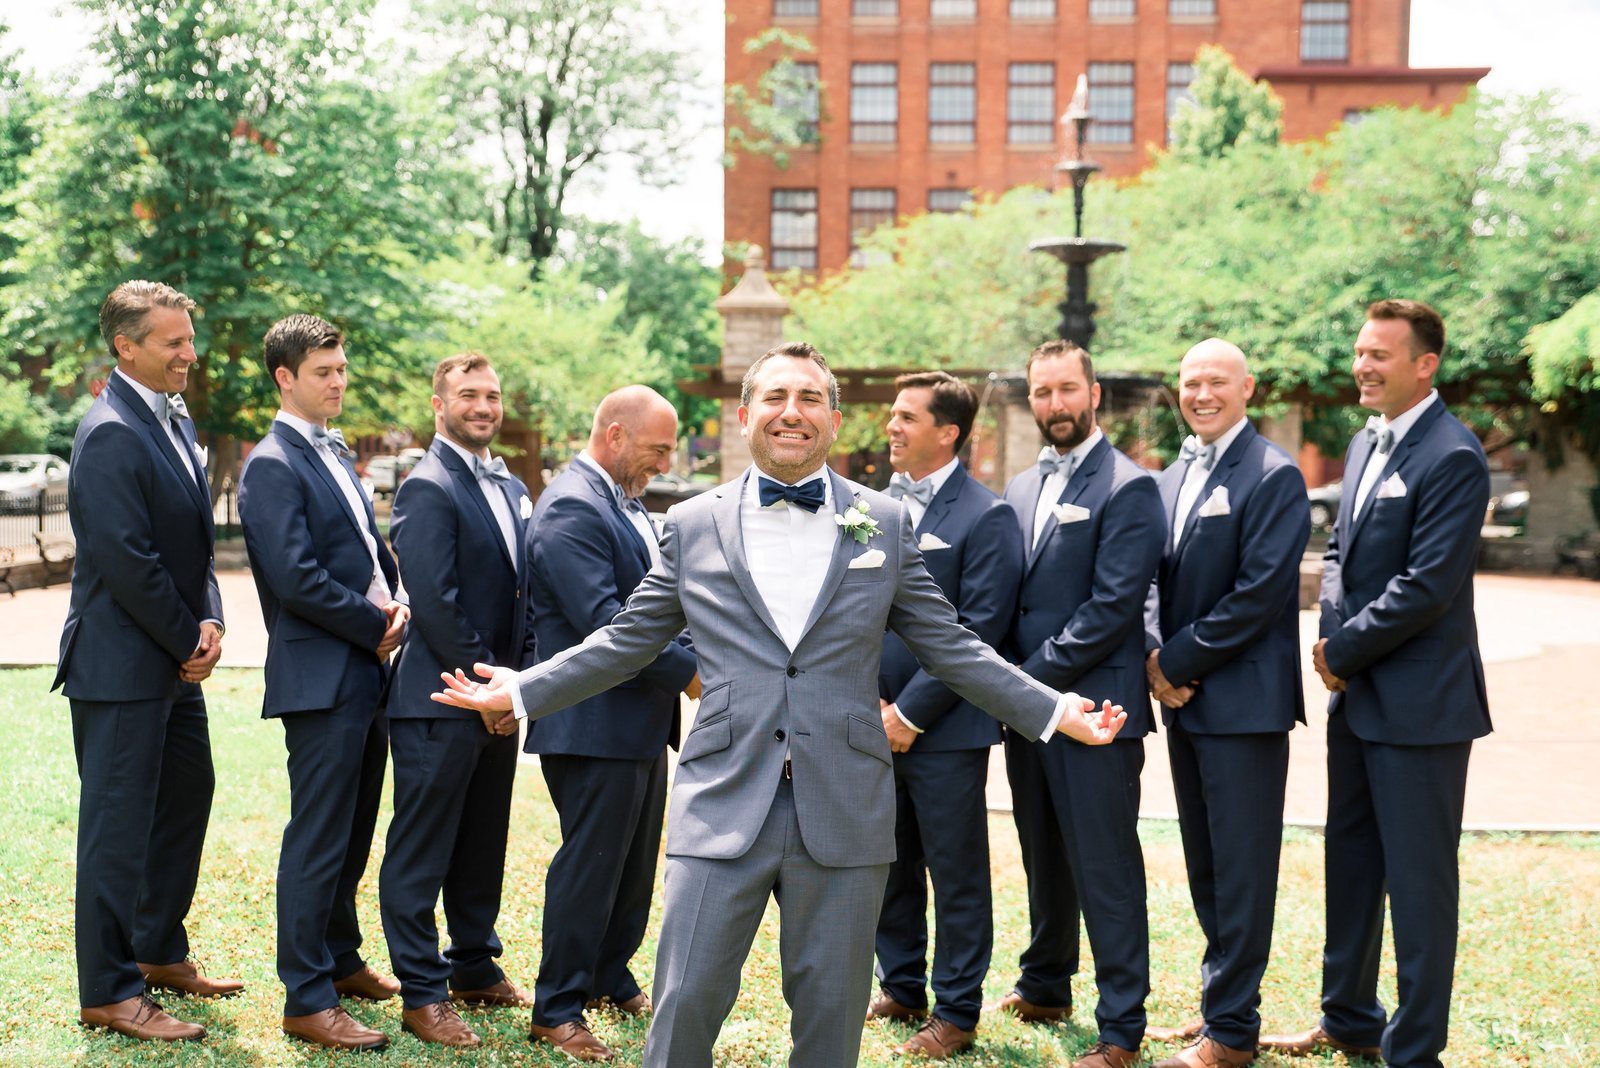 Groomsmen pose for a silly picture in front of a fountain in Armory Square. Syracuse Photographer